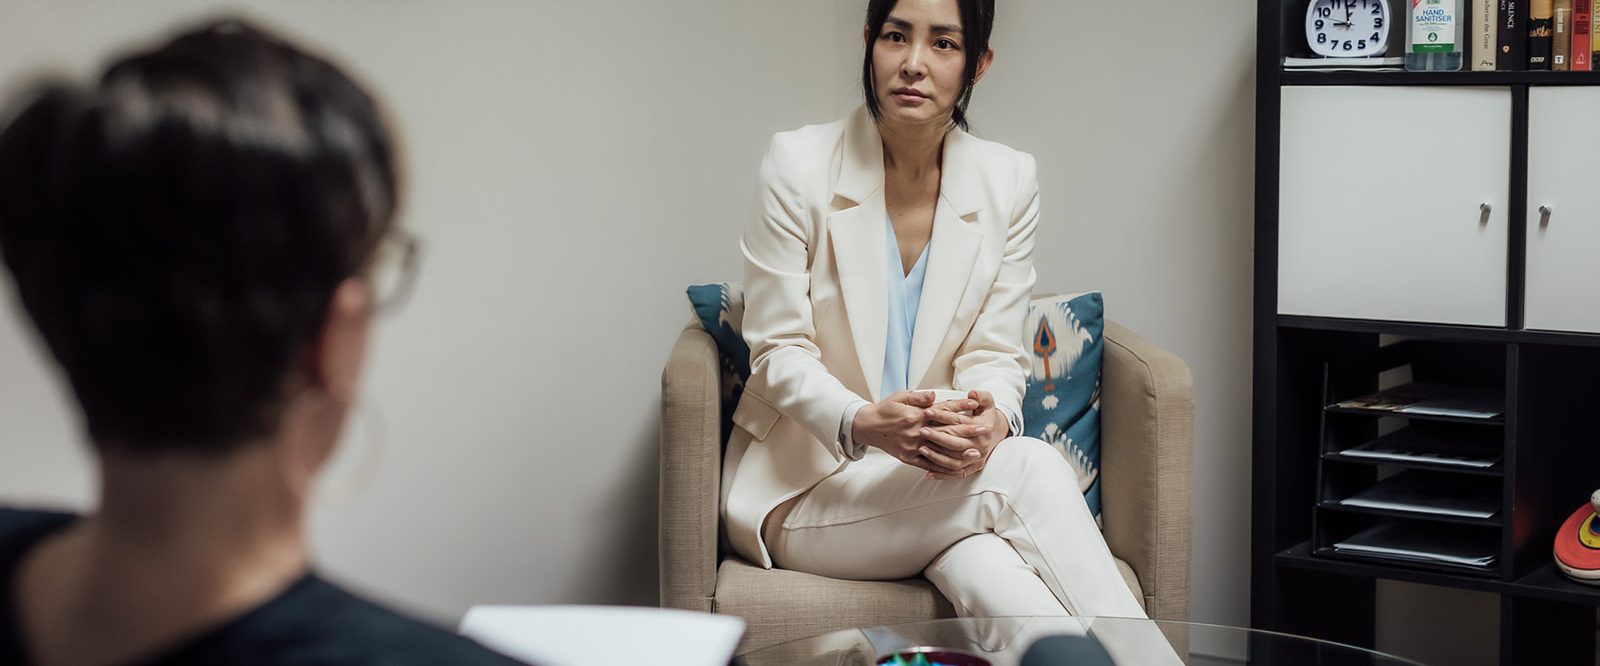 A young woman looking sad in a counselling session.